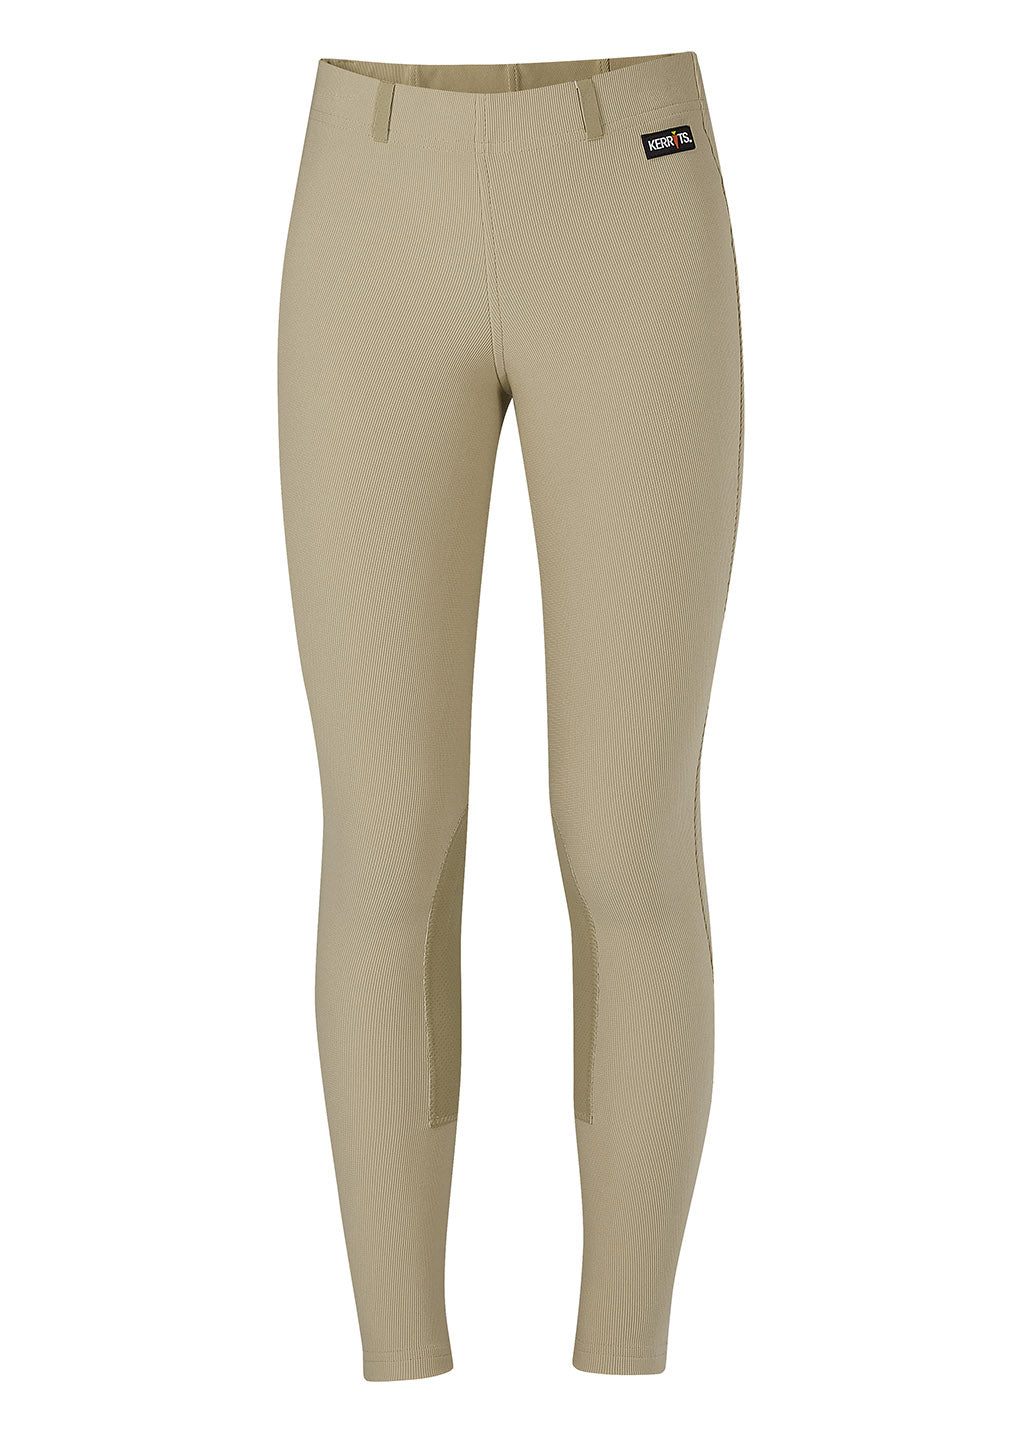  Womens Riding Tights Knee-Patch Breeches Equestrian